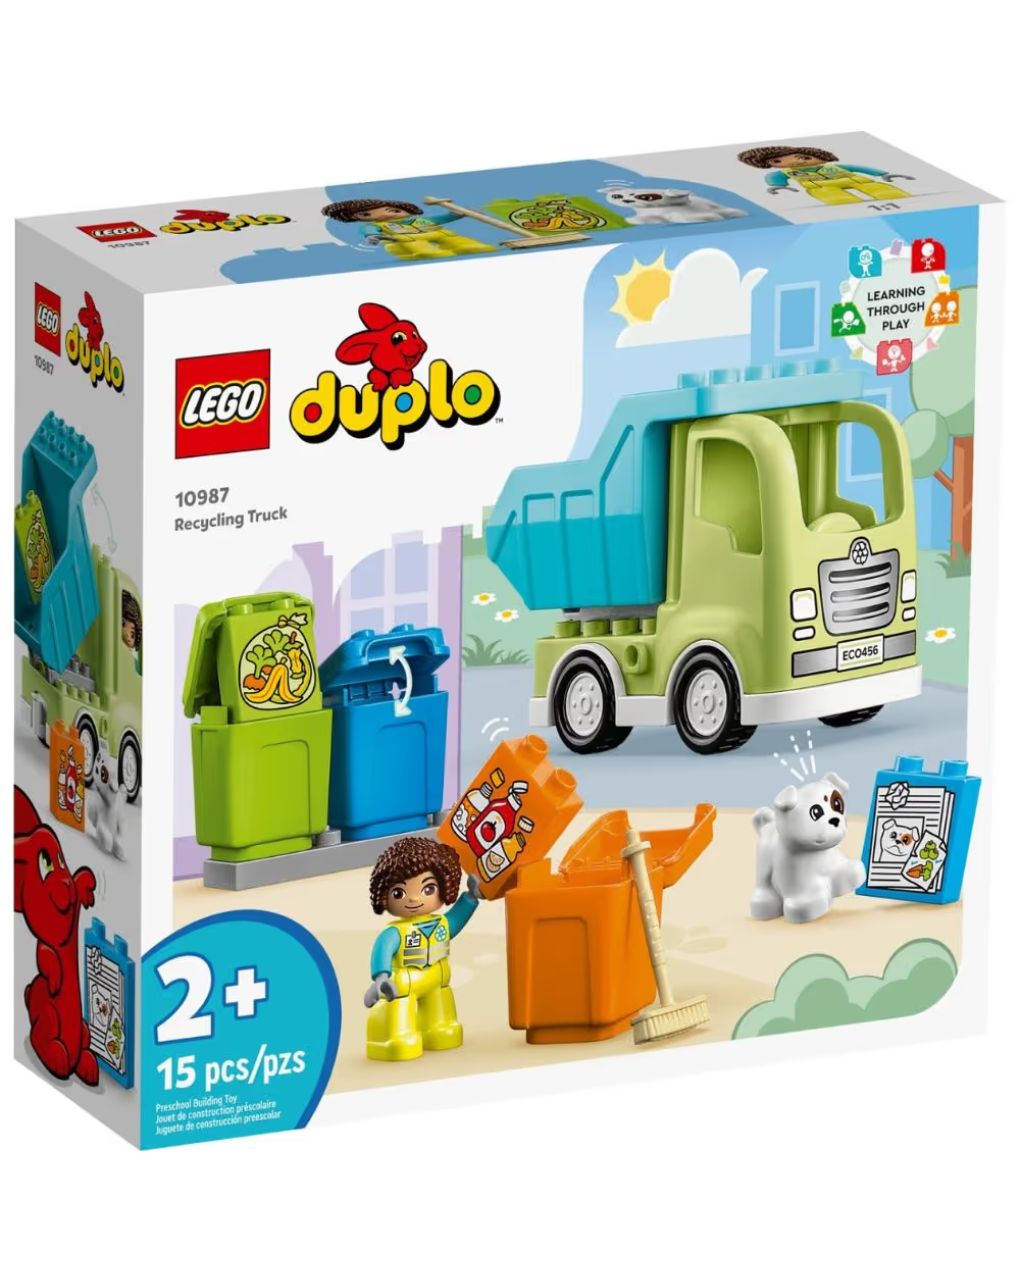 Lego duplo recycling truck 10987